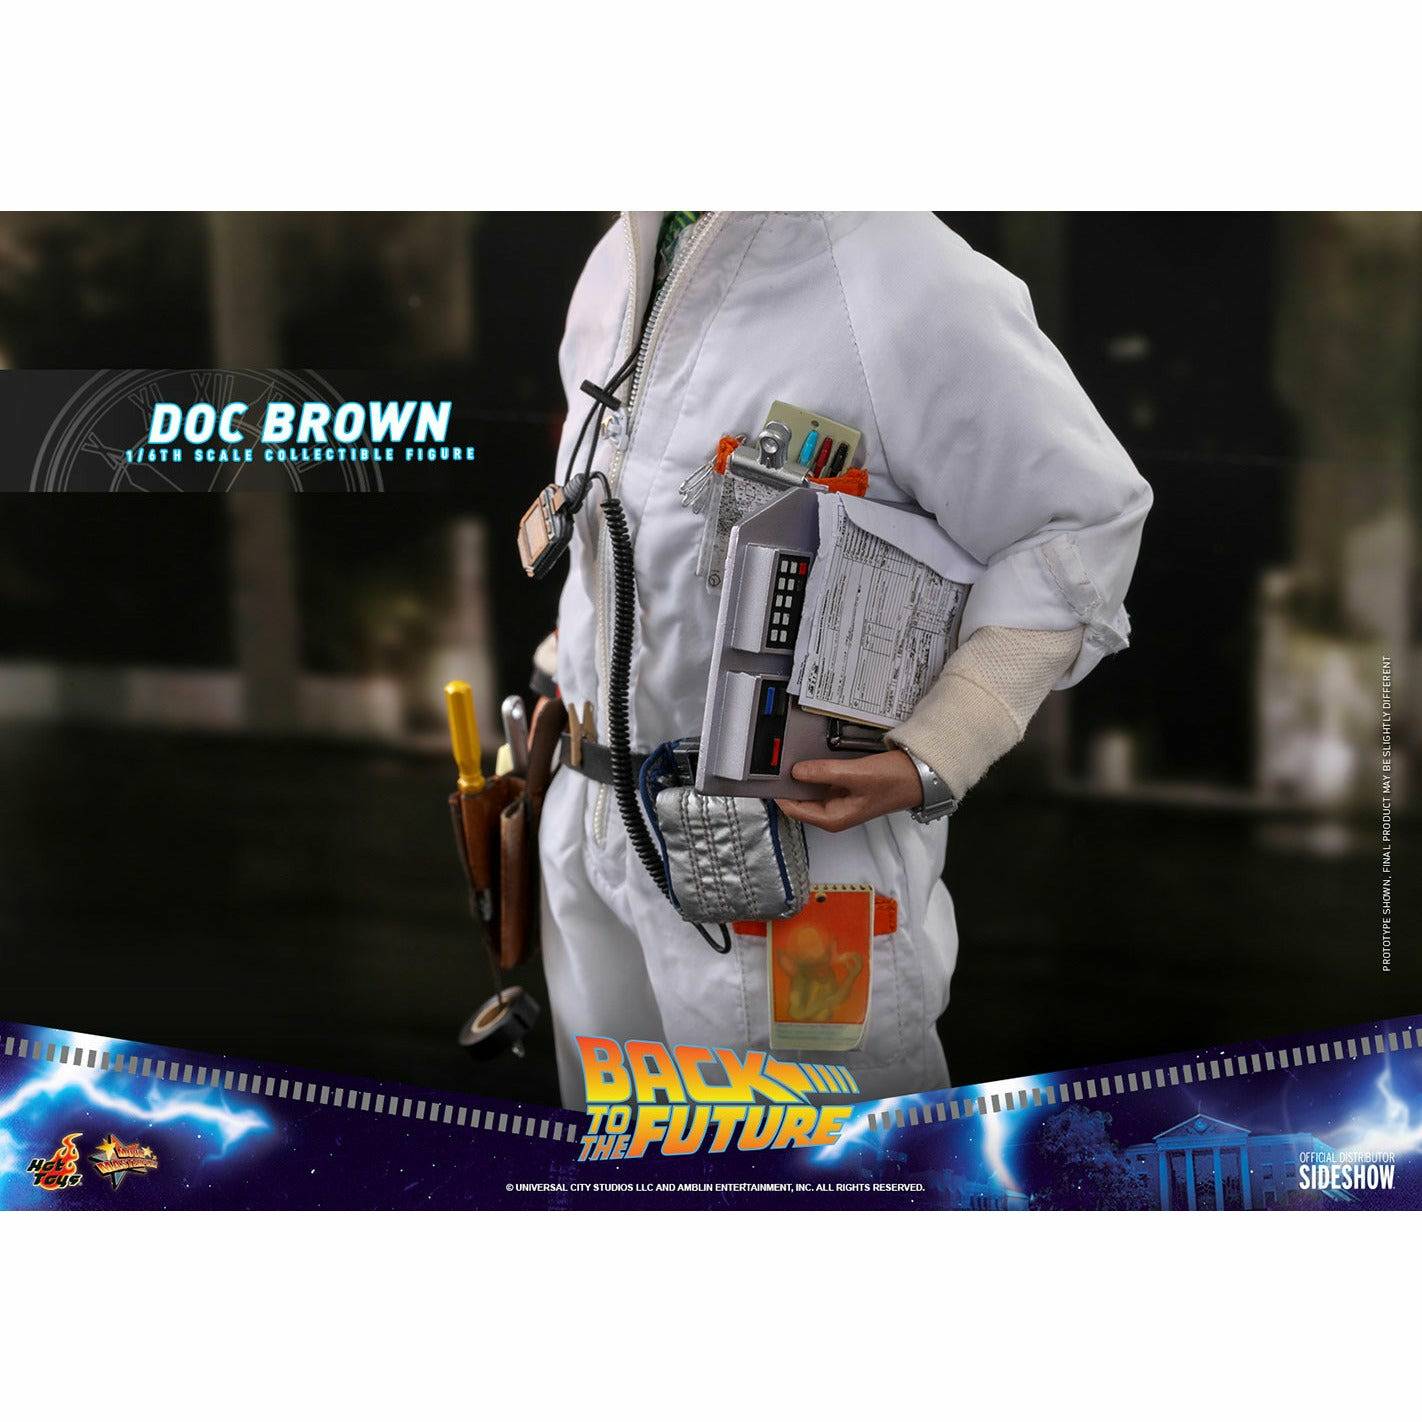 Hot Toys Back to the Future Doc Brown (Standard Version) 1:6 Scale Collectible Figure Action Figure Hot Toys